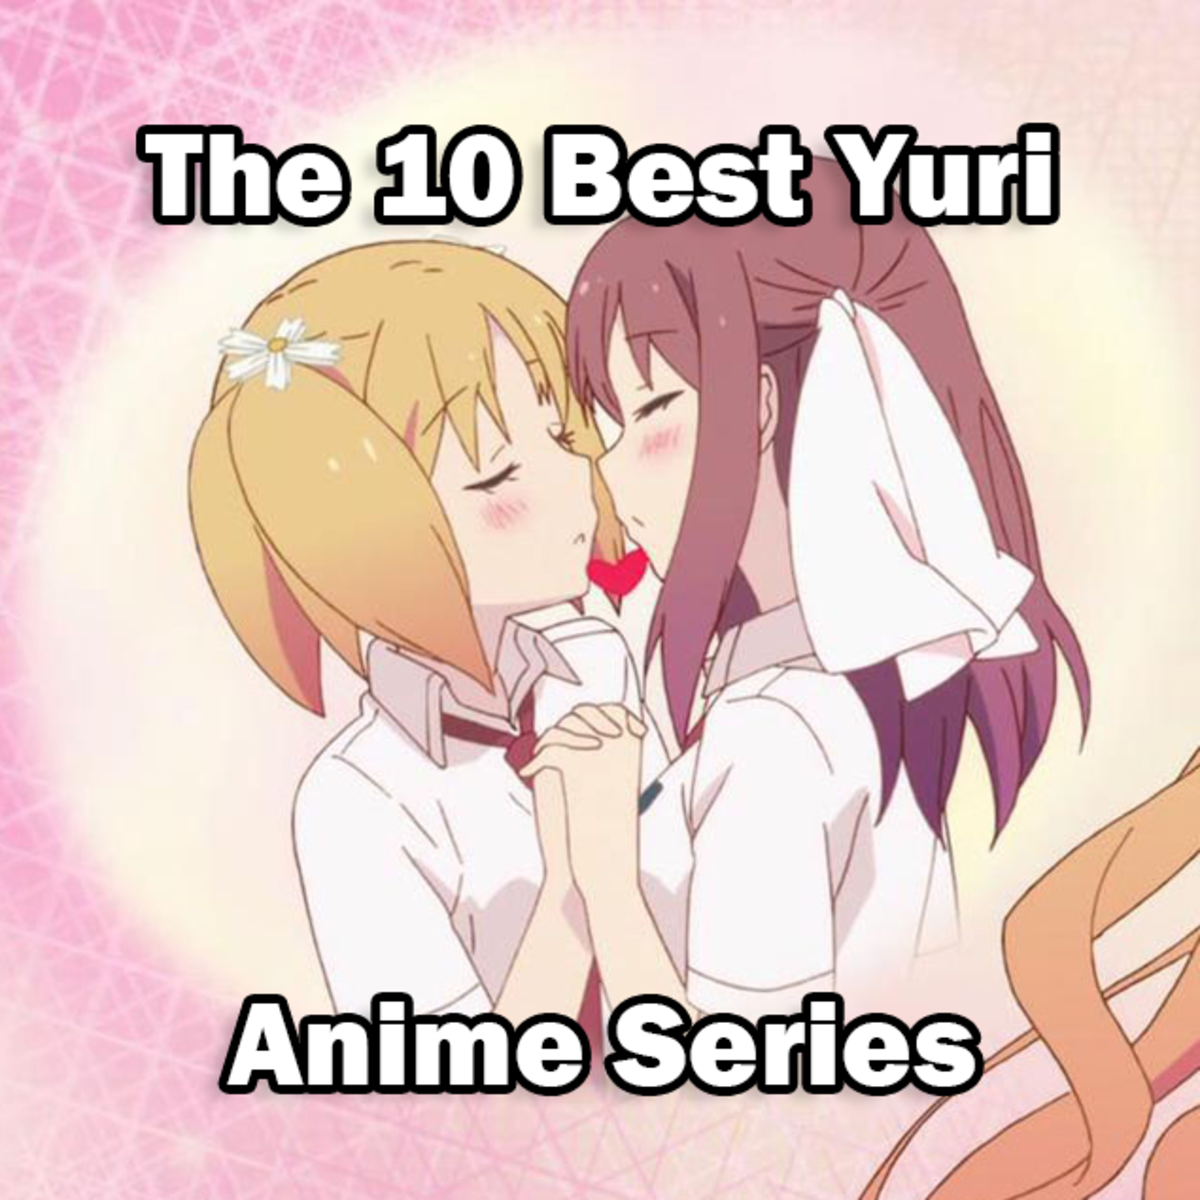 Here are the top 10 yuri anime that you can watch.